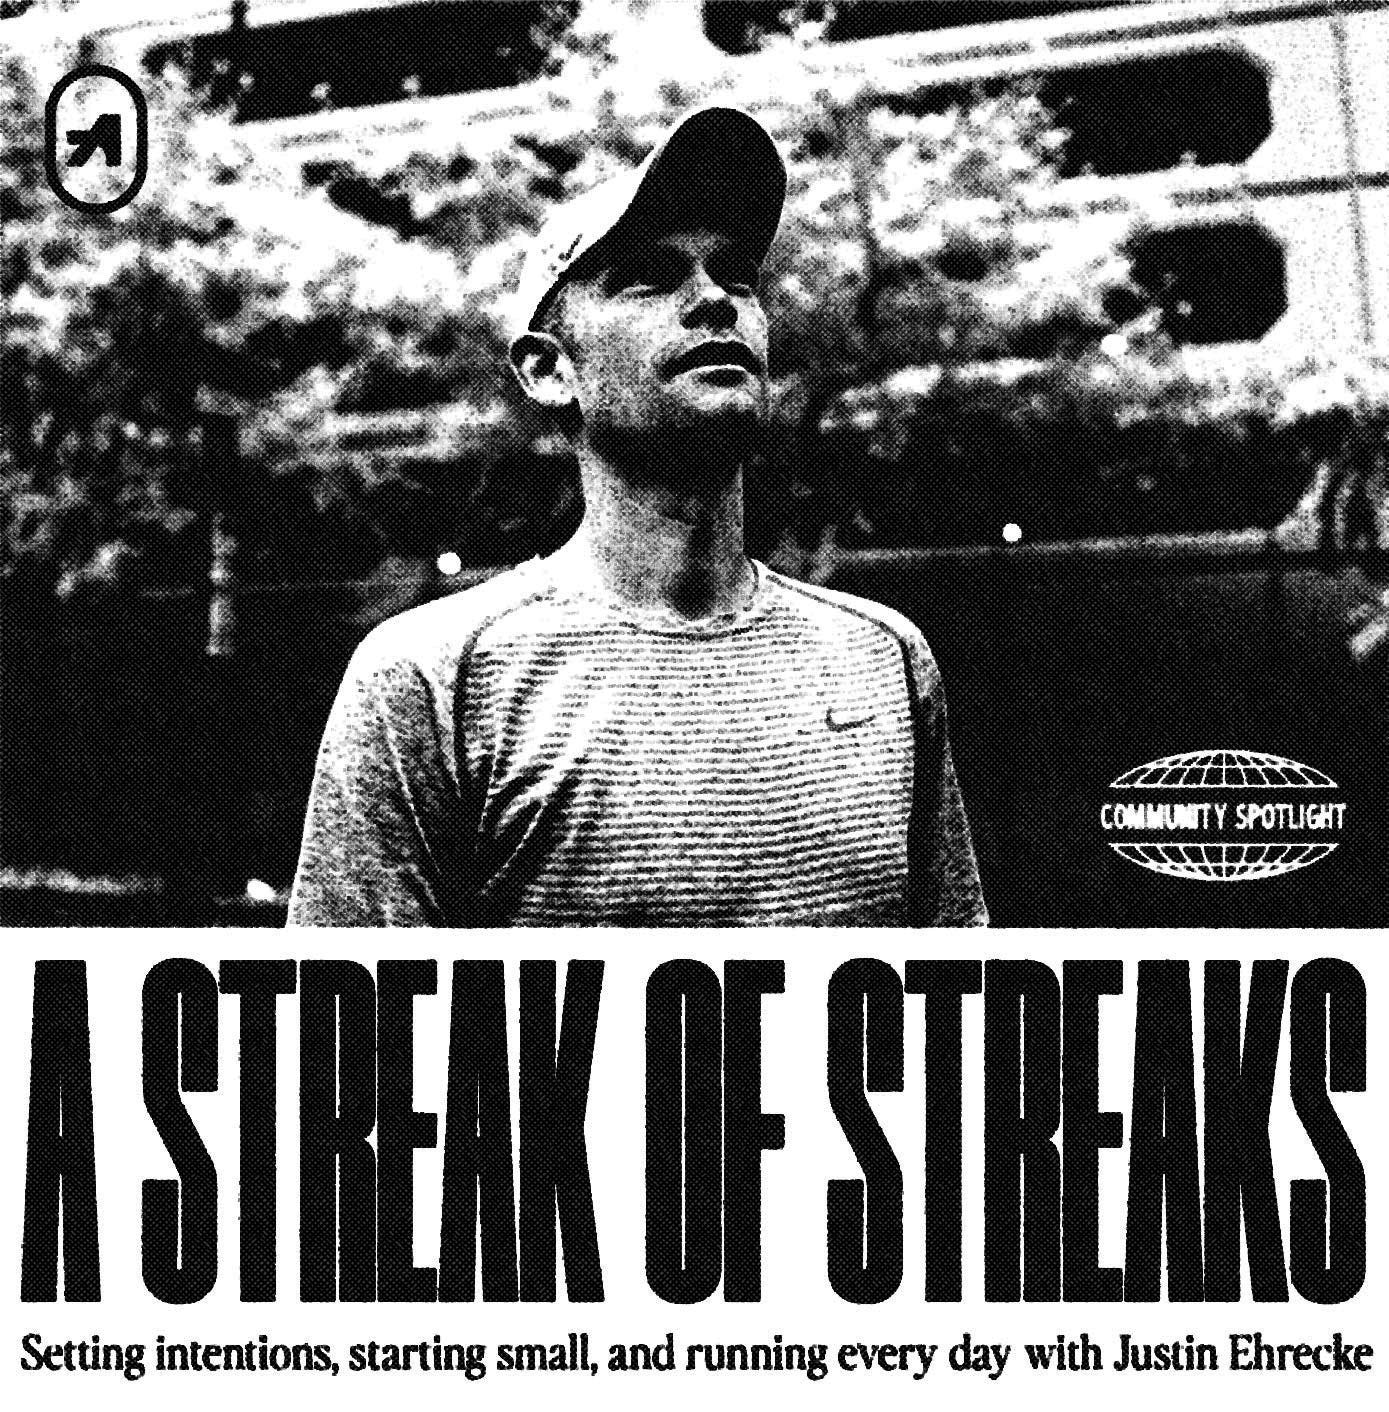 Black and white image of Justin Ehrecke looking up towards the sky, with the title "A Streak of Streaks" followed by "Setting intentions, starting small, and running every day with Justin Ehrecke."